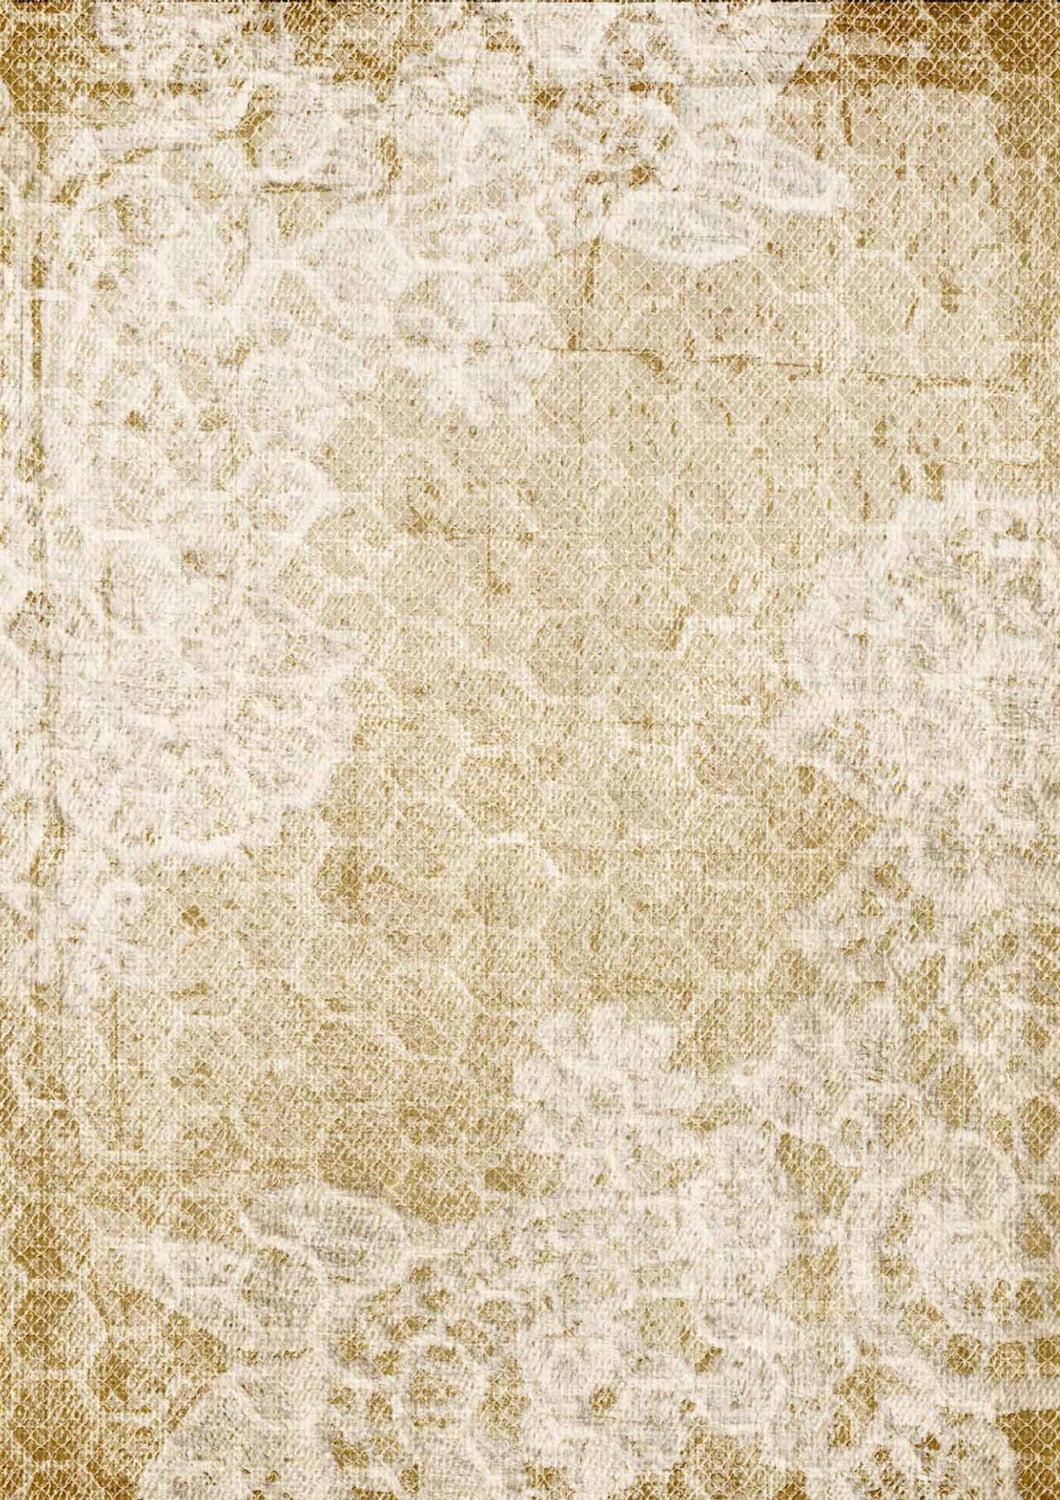 Vintage Lace Rice Paper by Decoupage Queen, A3 and A4 Sizes